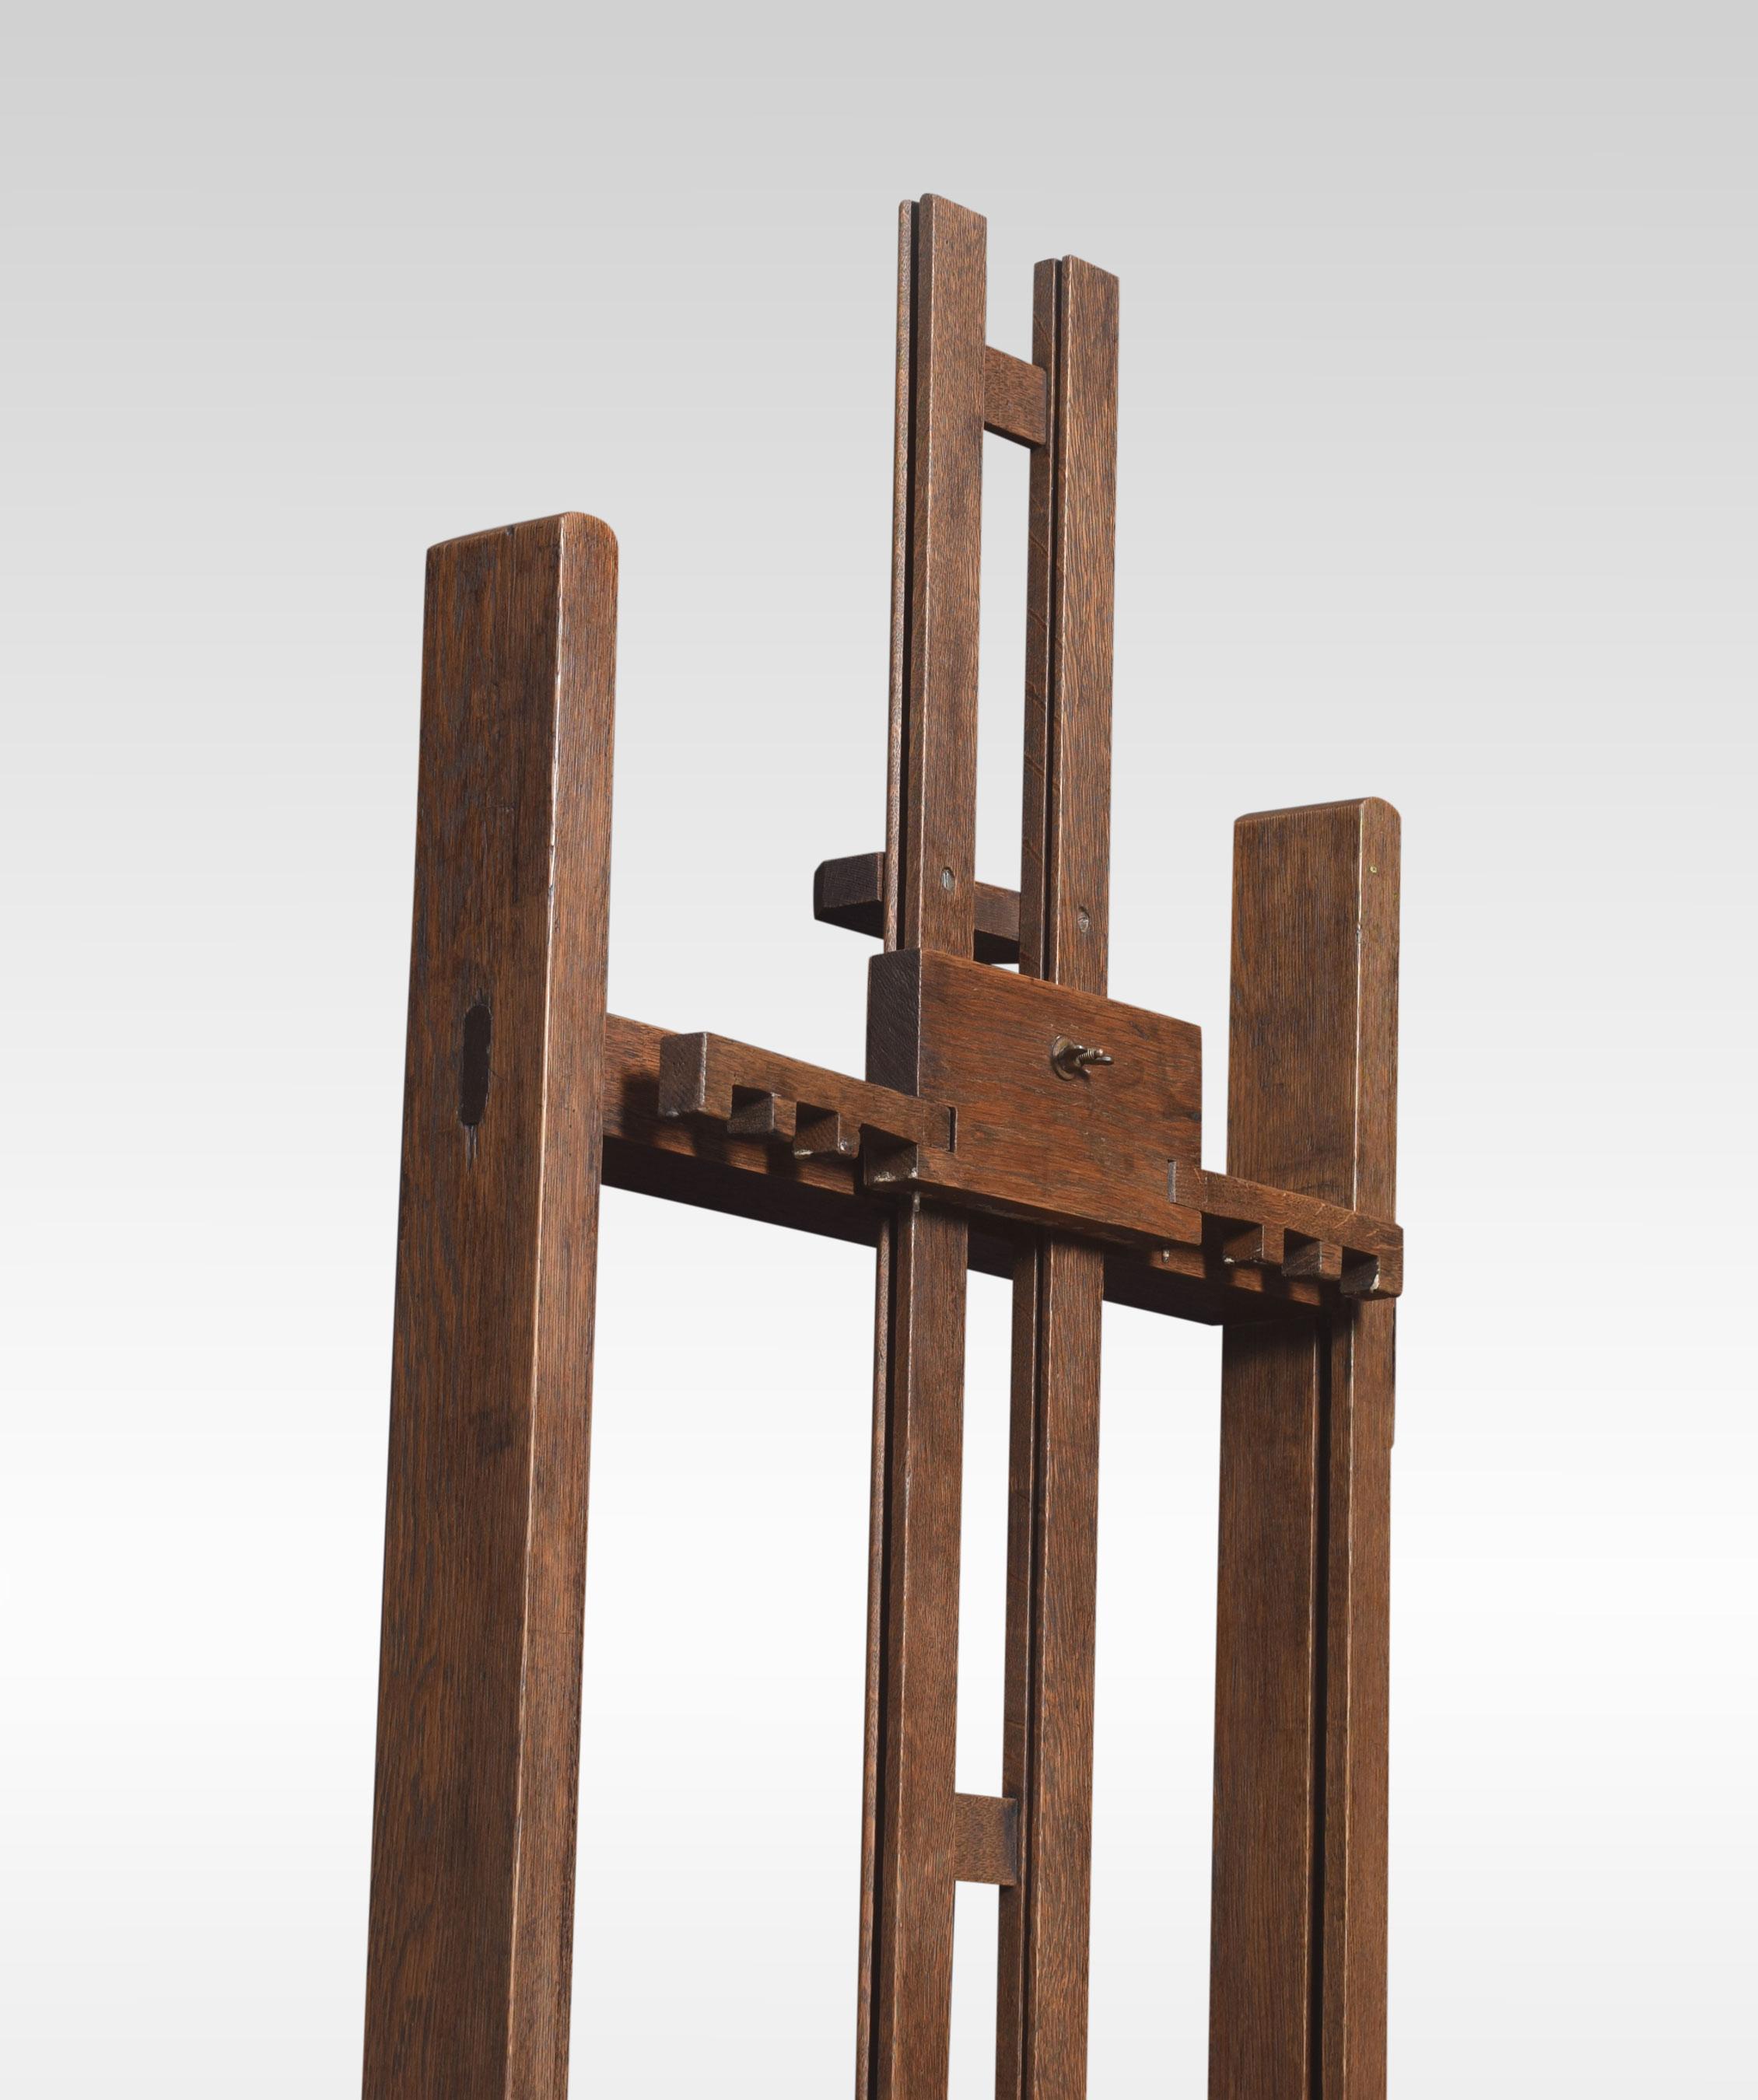 Oak artist’s adjustable studio easel by J Bryce Smith raised up on trestle base terminating in casters.
Dimensions
Height 66 adjustable to 103.5 inches
Width 25 inches
Depth 27 inches.